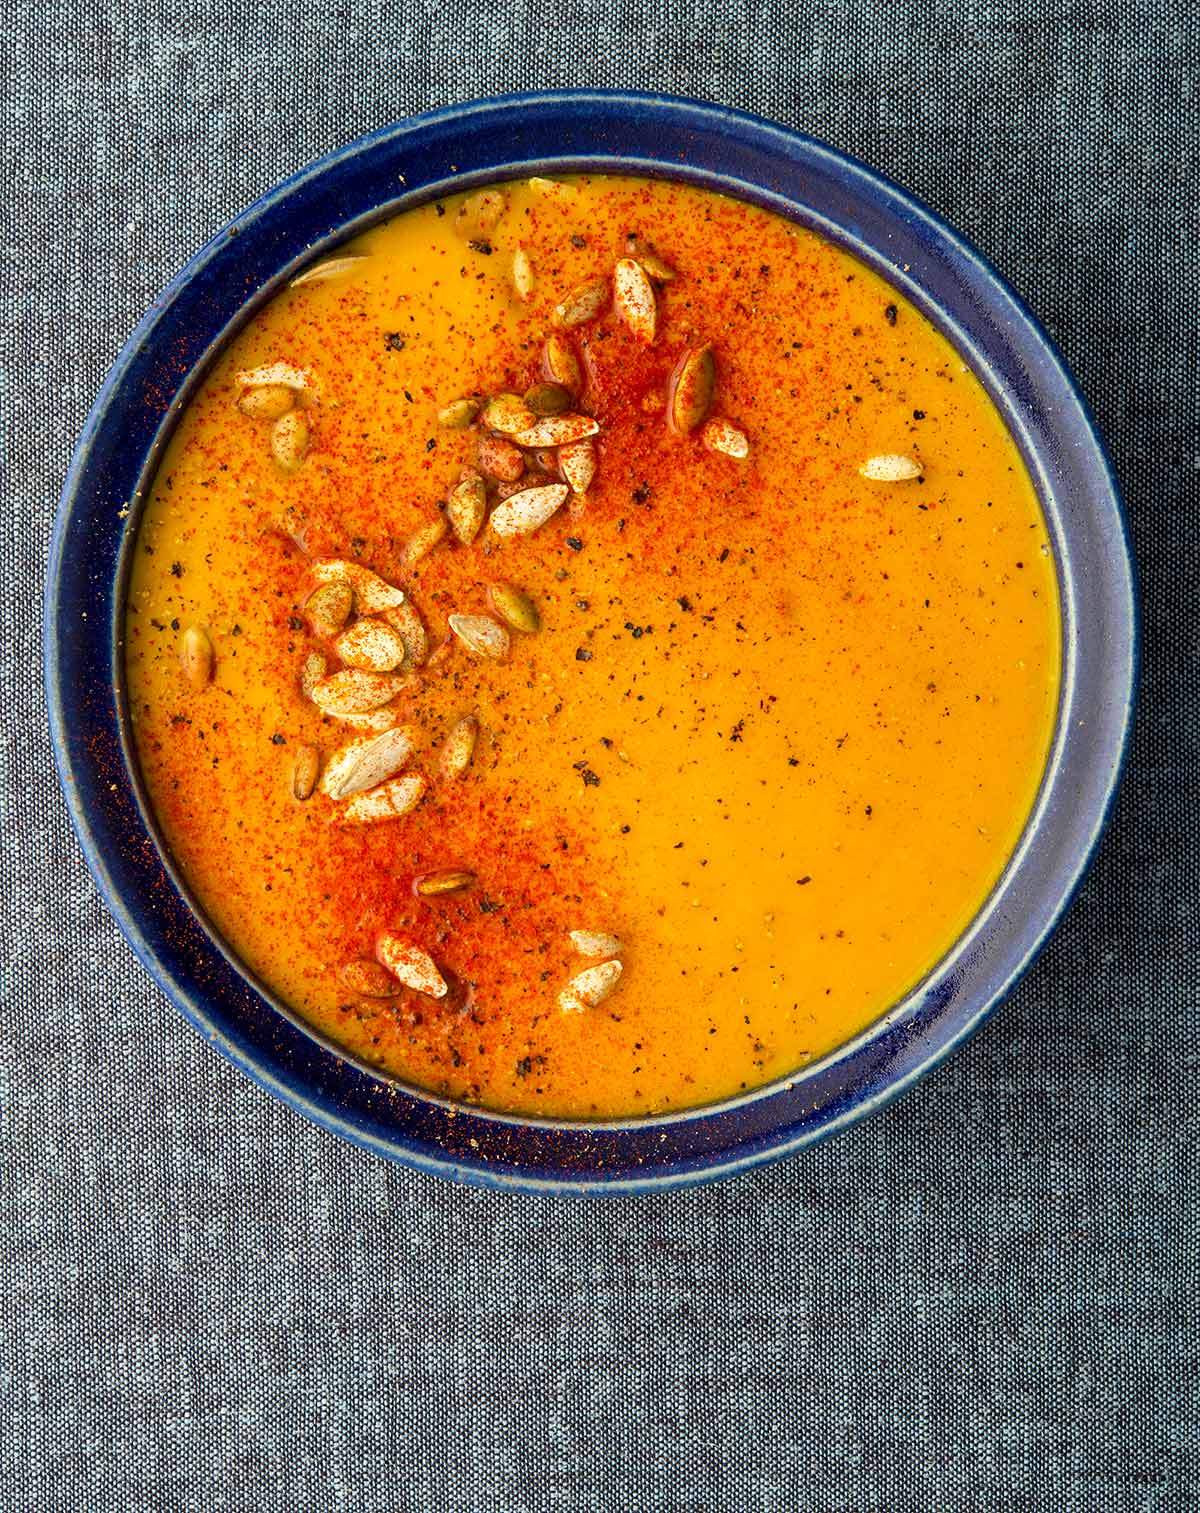 A bowl of spicy butternut squash soup, garnished with squash seeds.